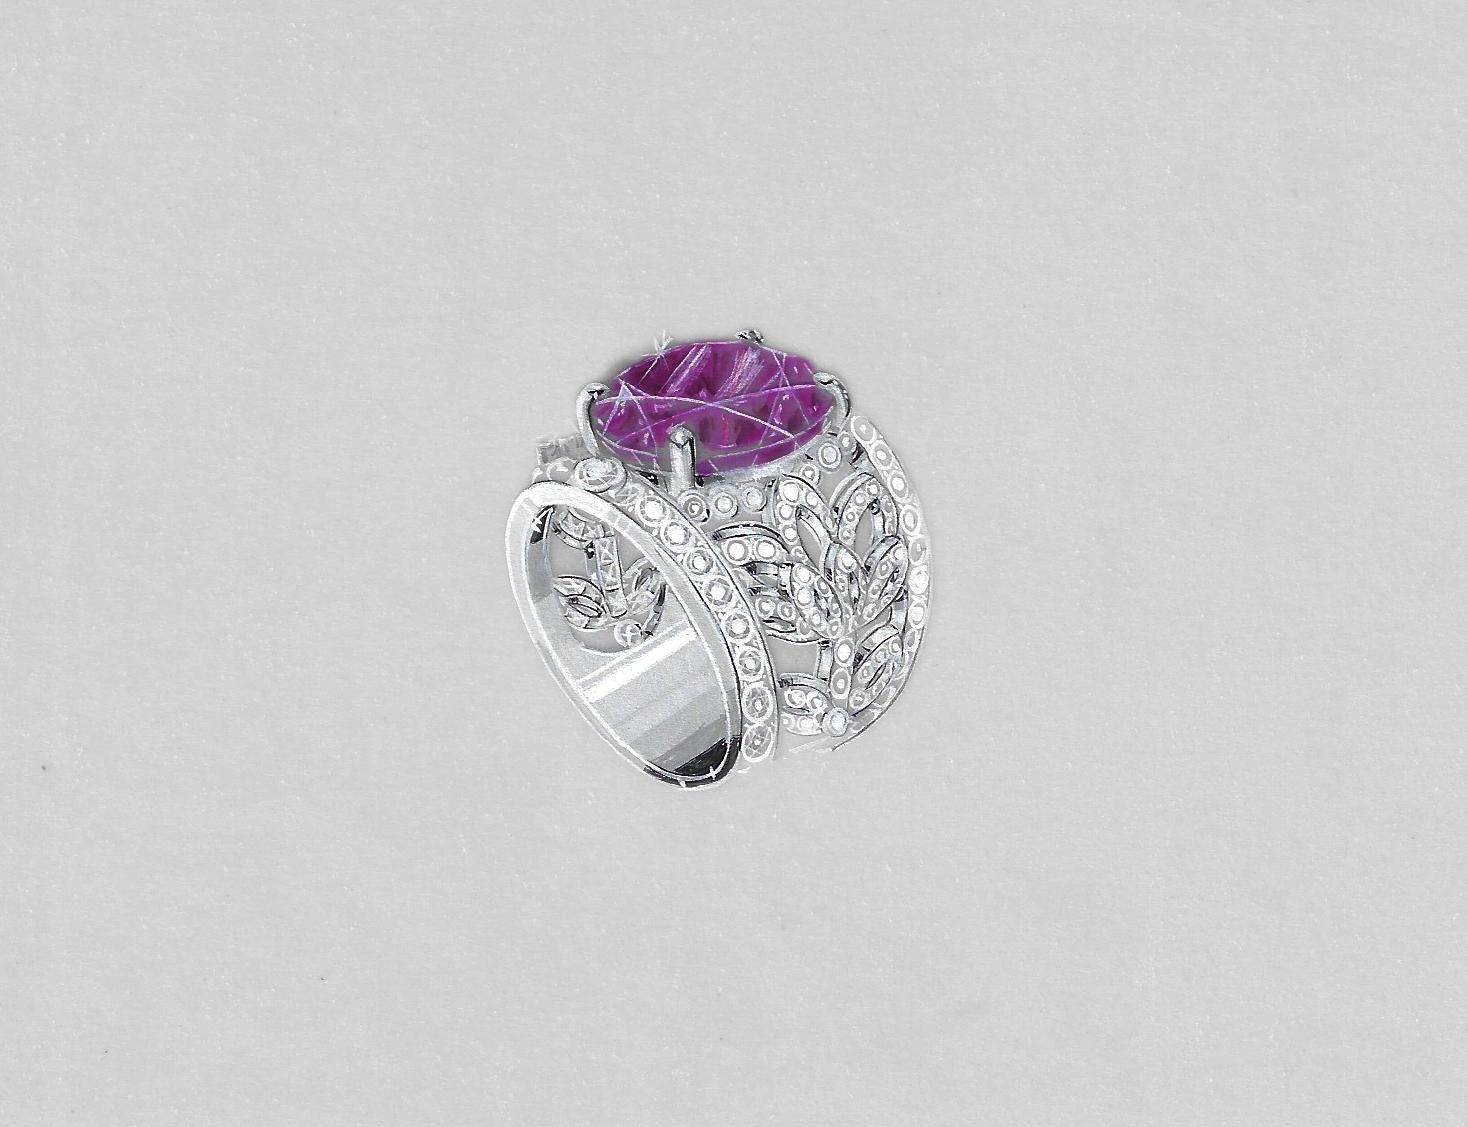 Contemporary Certified 8.77 Carat Natural Purple Sapphire for Bespoke Ring Creation  For Sale